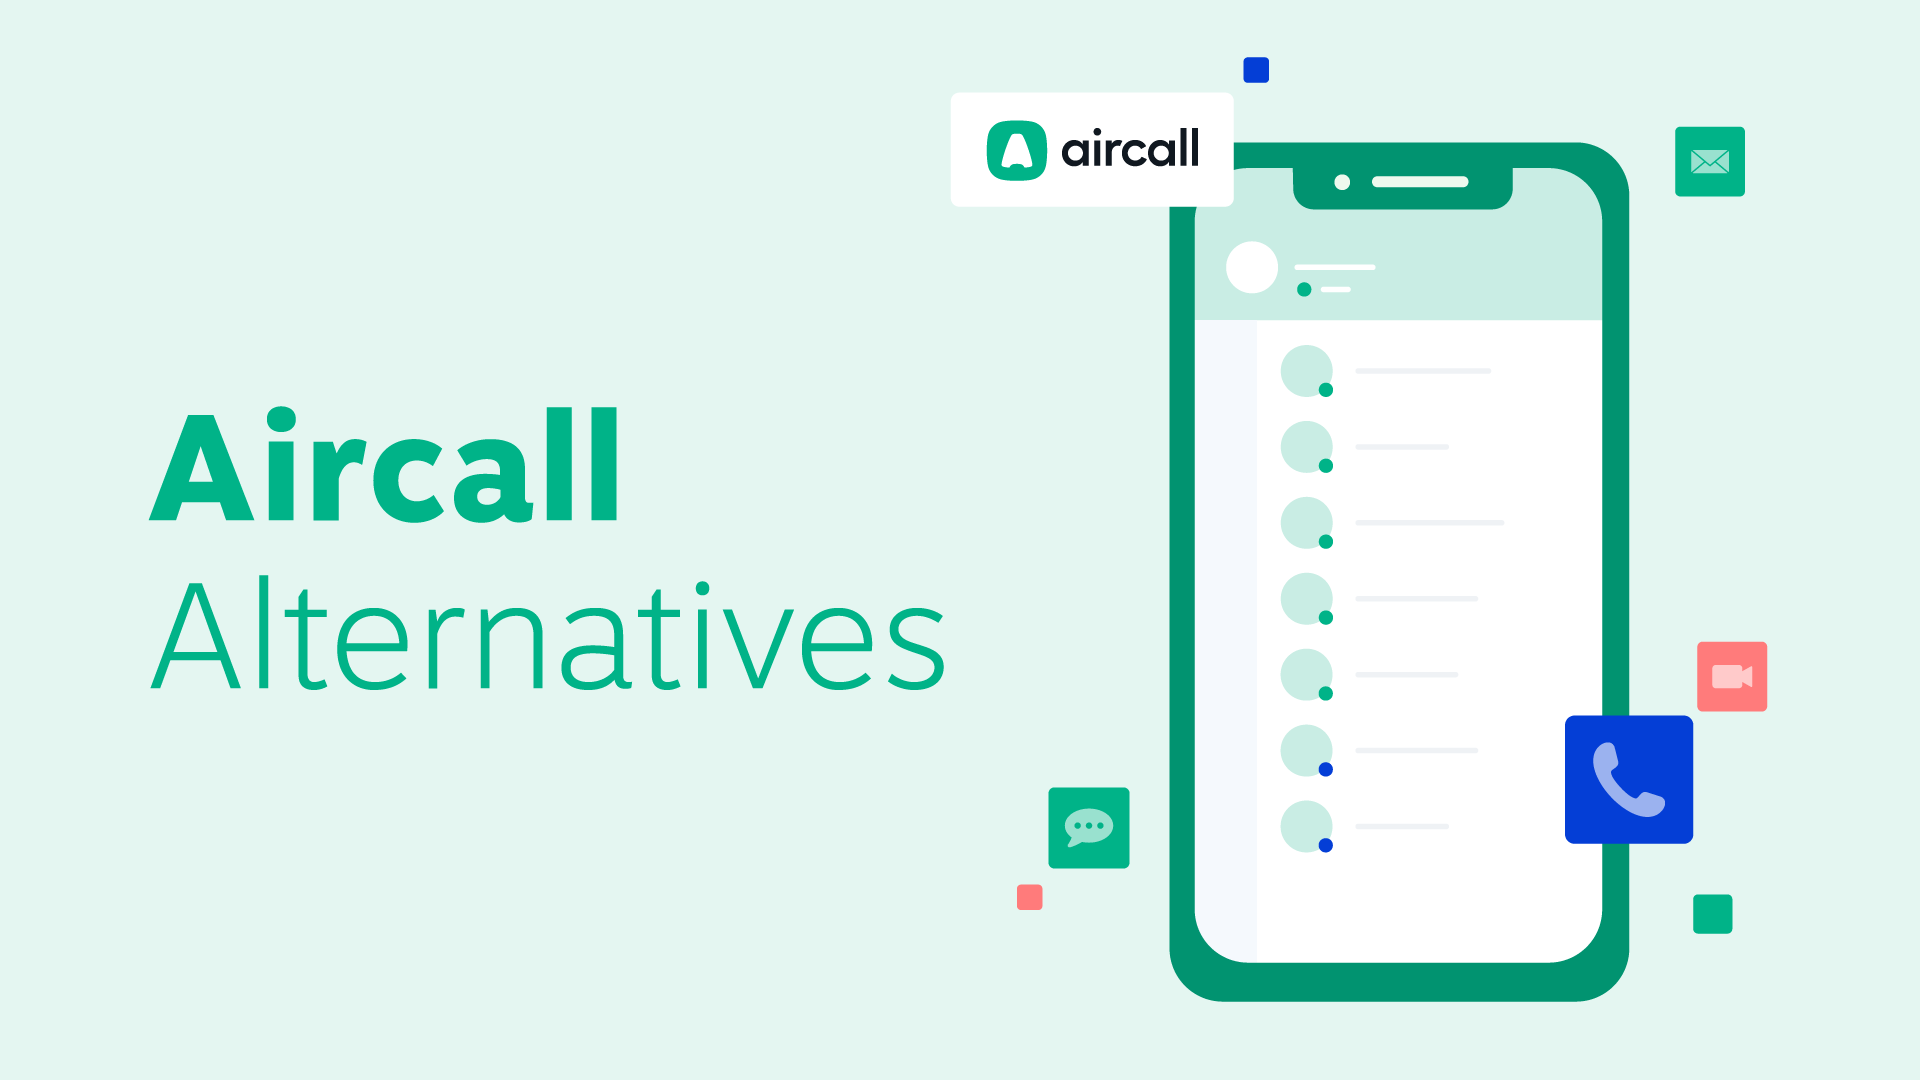 aircall support